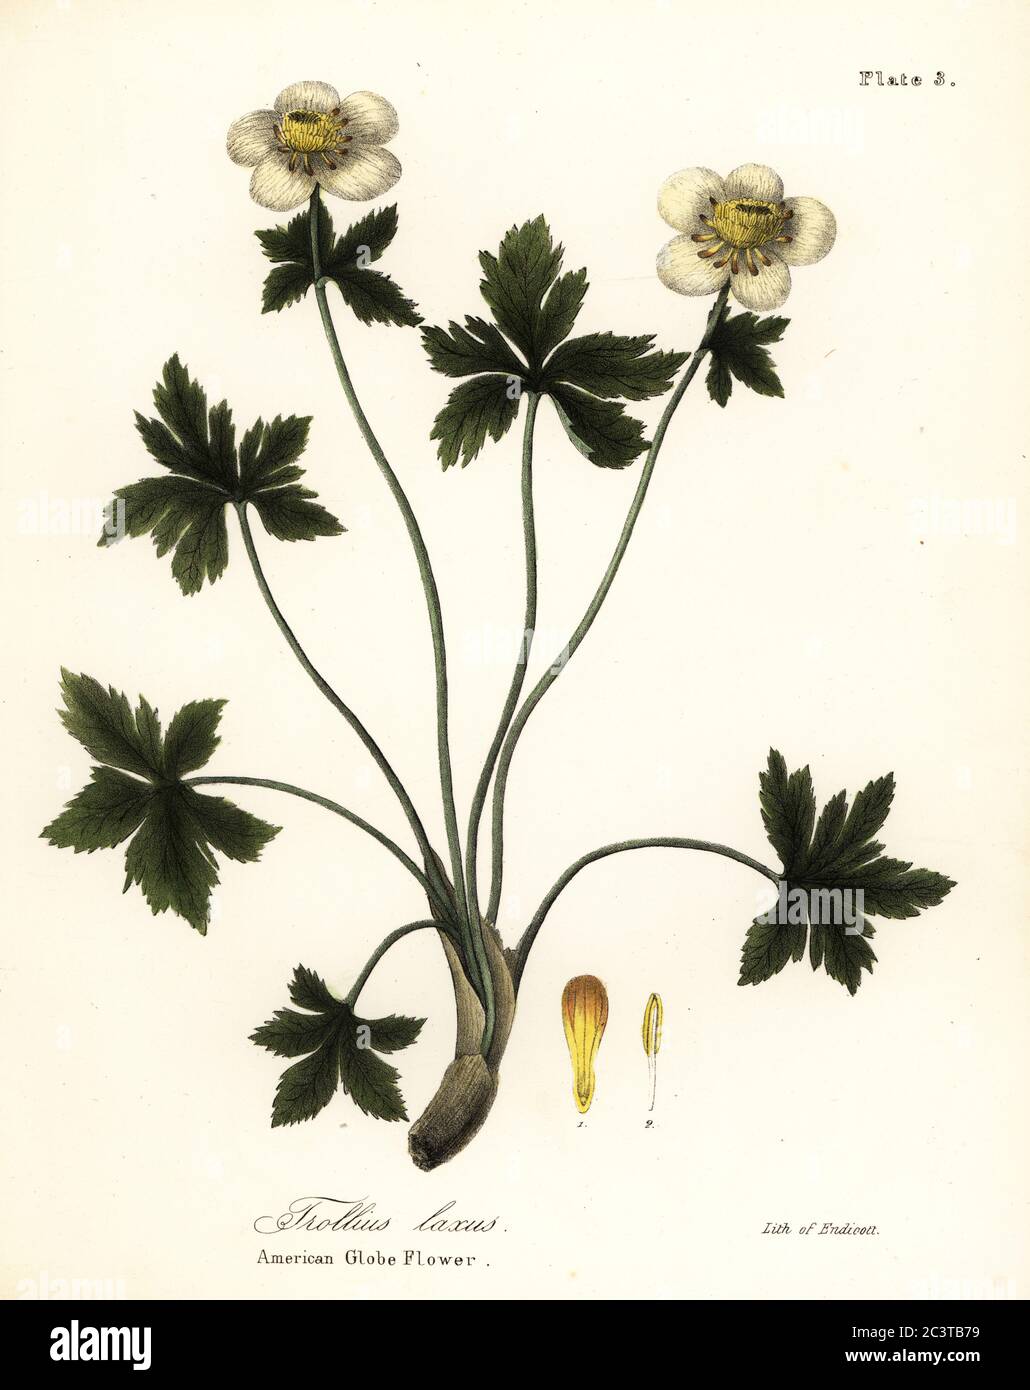 American globe flower or American spreading globeflower, Trollius laxus. Handcoloured lithograph by Endicott after a botanical illustration from John Torrey’s A Flora of the State of New York, Carroll and Cook, Albany, 1843. The plates drawn by John Torrey, Agnes Mitchell, Elizabeth Paoley and Swinton. John Torrey was an American botanist, chemist and physician 1796-1873. Stock Photo